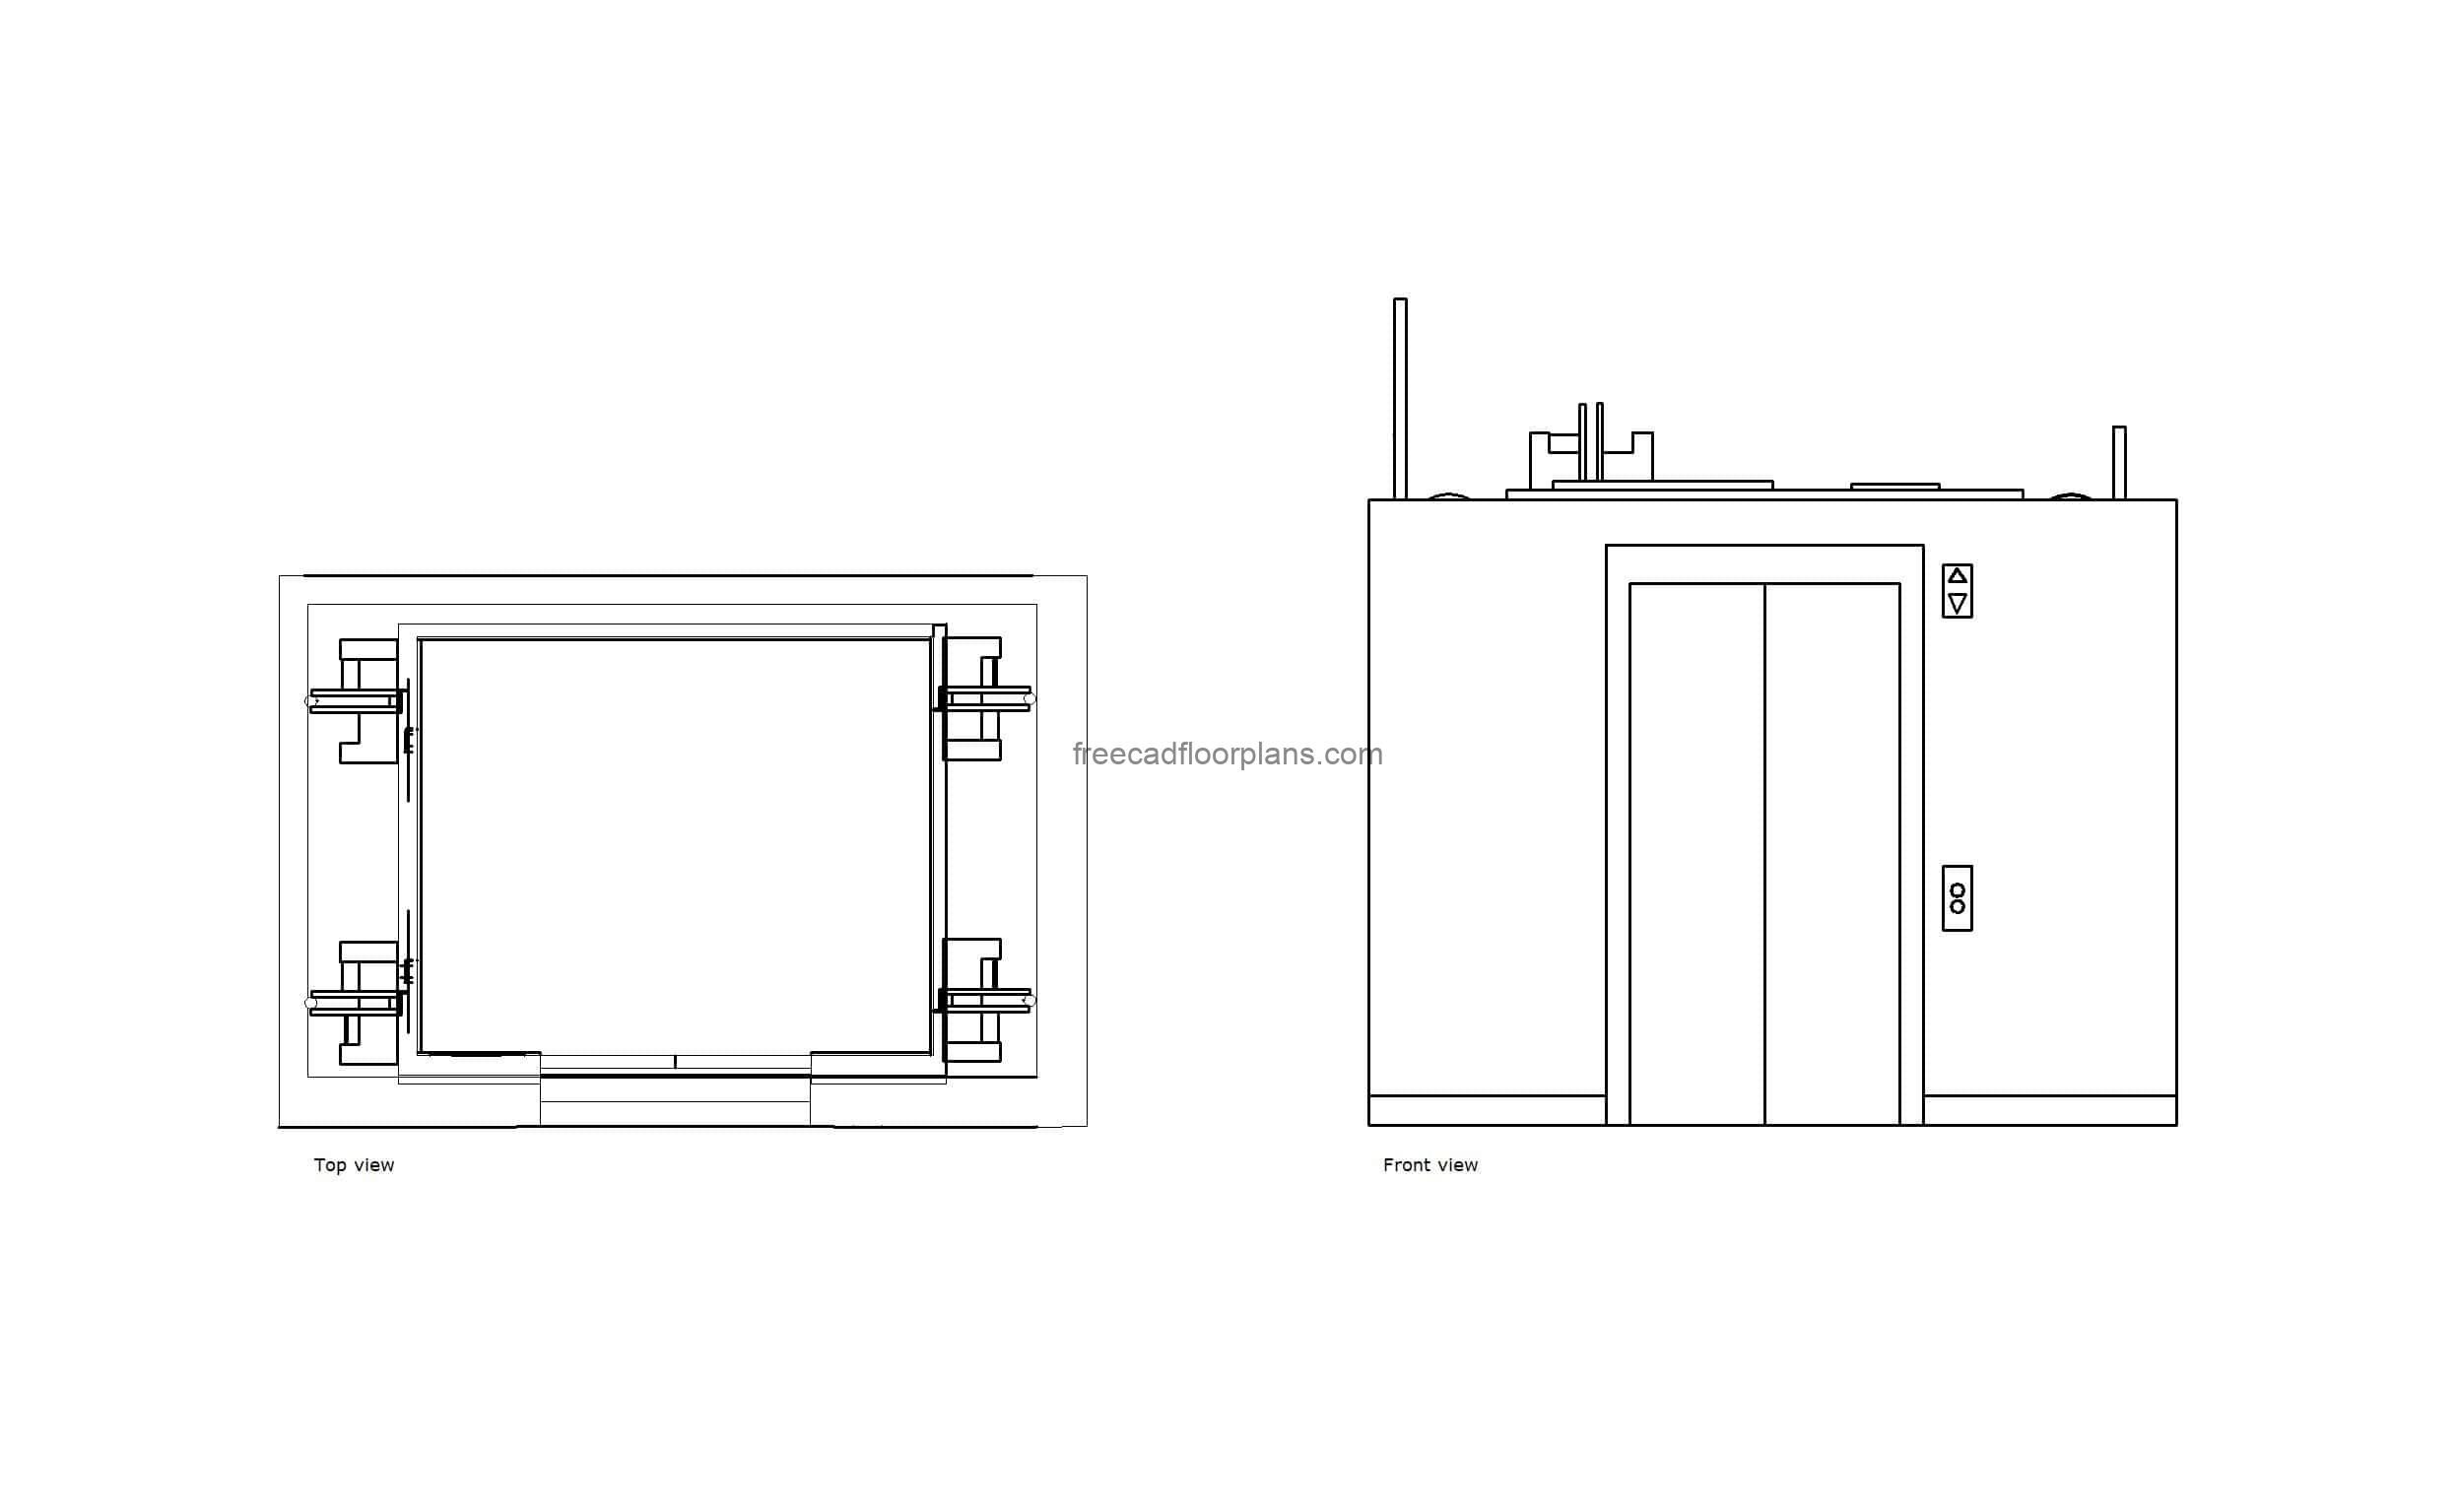 autocad drawing of a otis elevator, plan and elevation 2d views, dwg file free for download